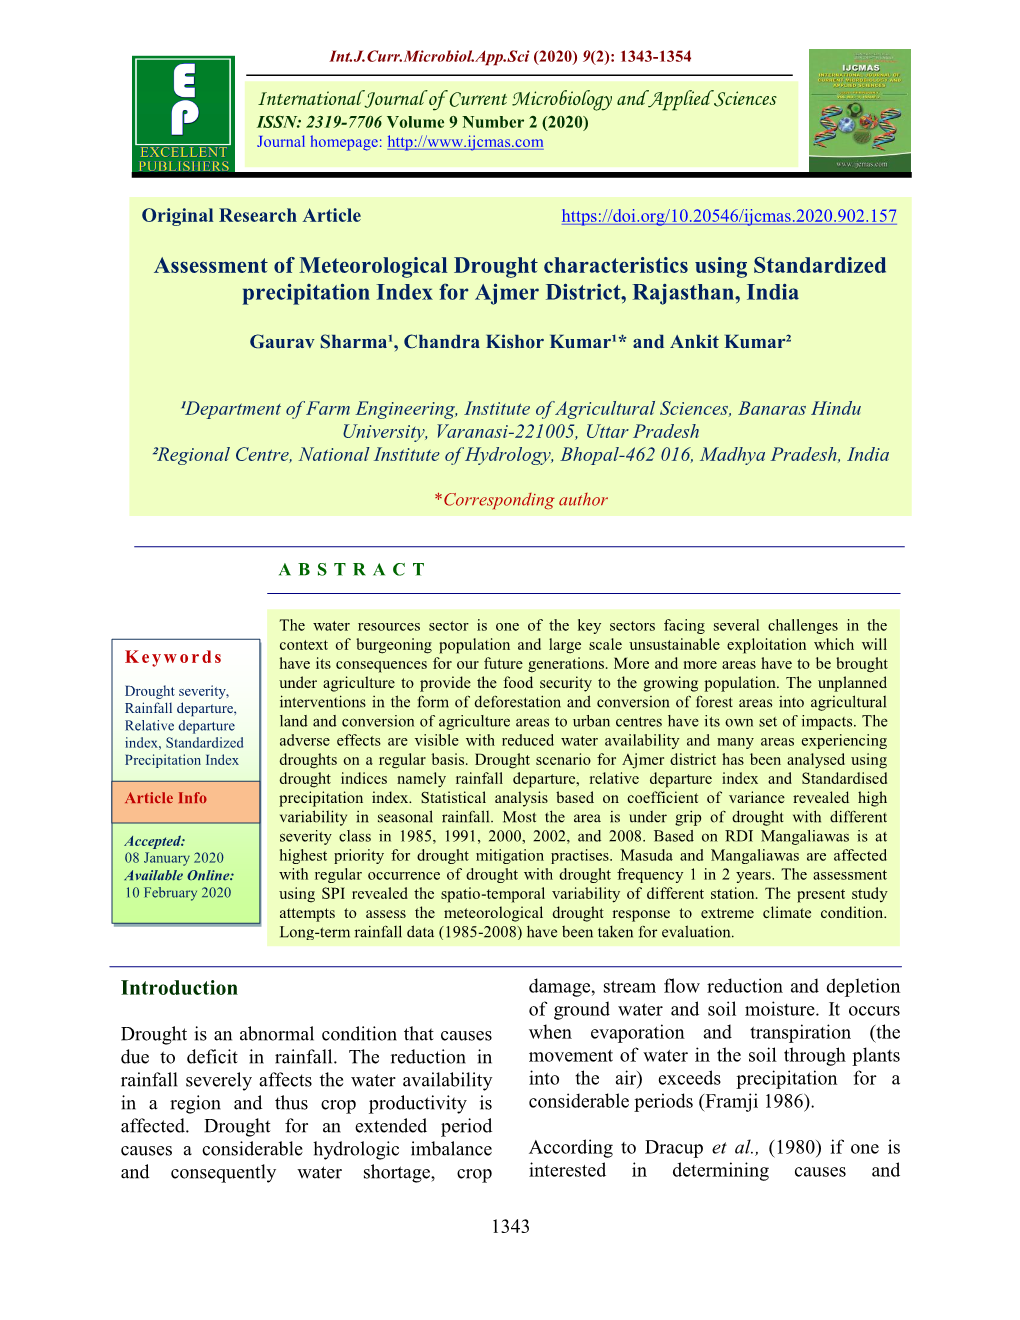 Assessment of Meteorological Drought Characteristics Using Standardized Precipitation Index for Ajmer District, Rajasthan, India